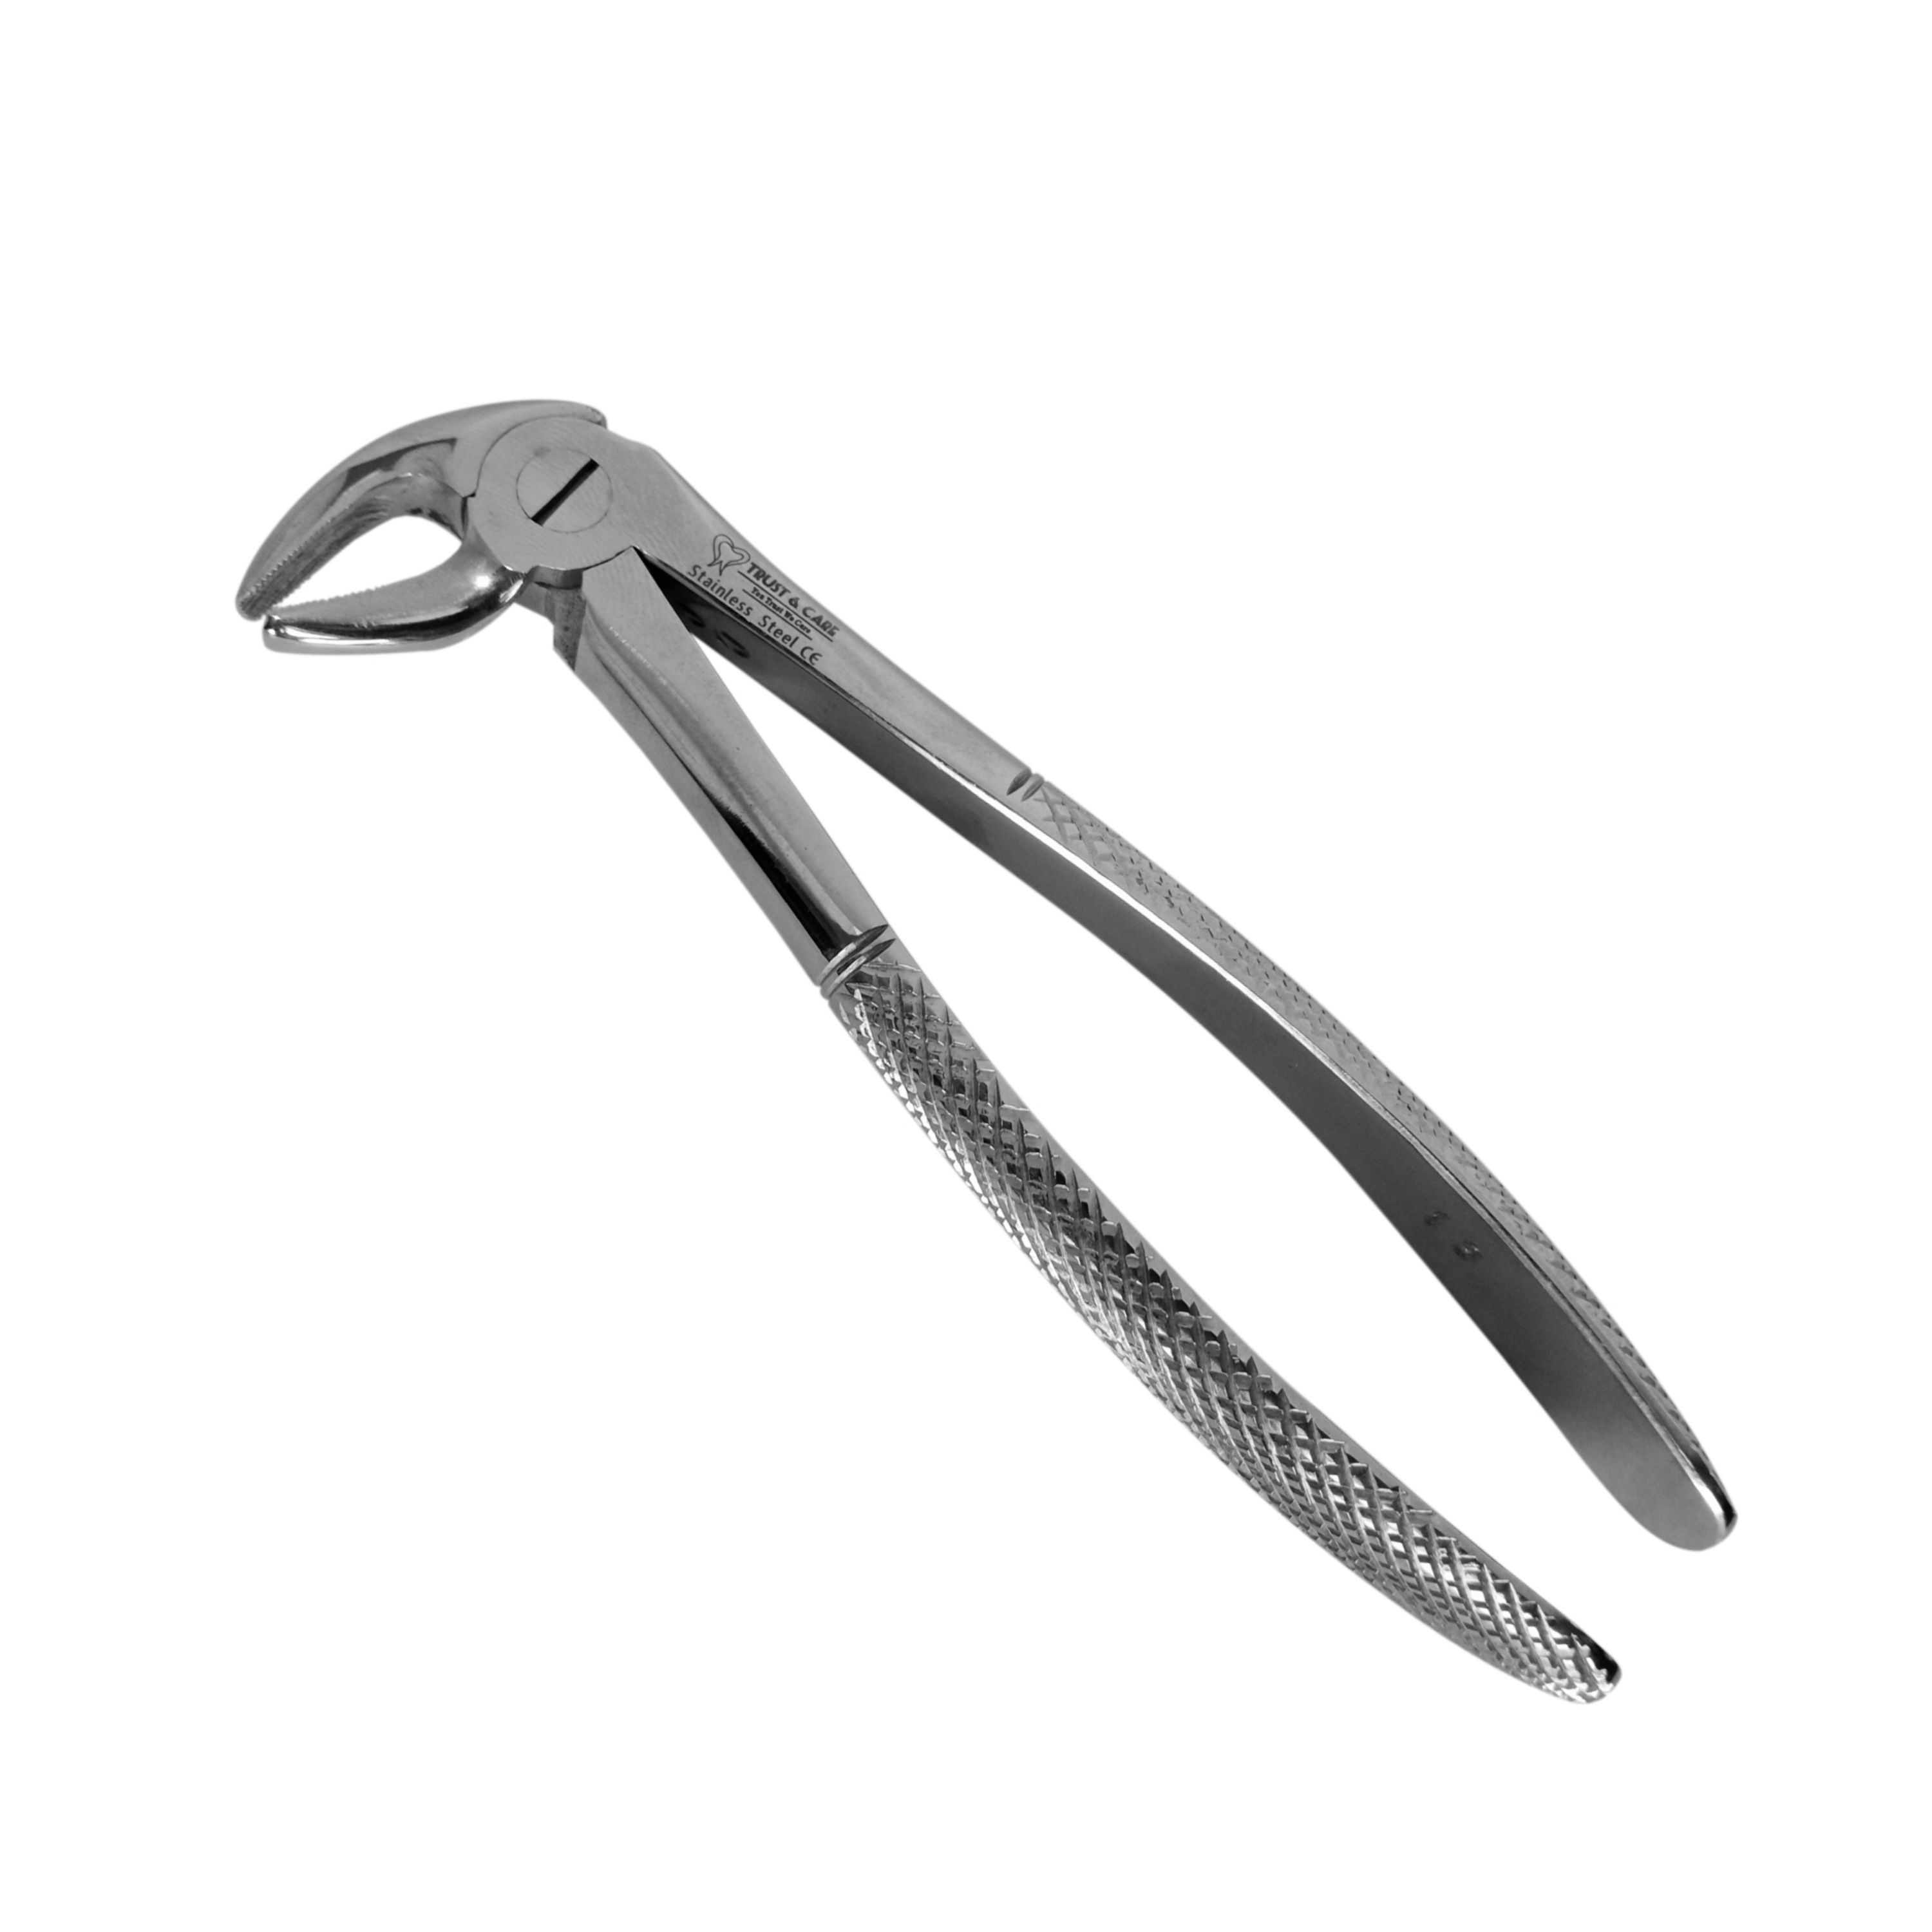 Trust & Care Tooth Extraction Forcep Lower Premolars Fig No. 13 Standard